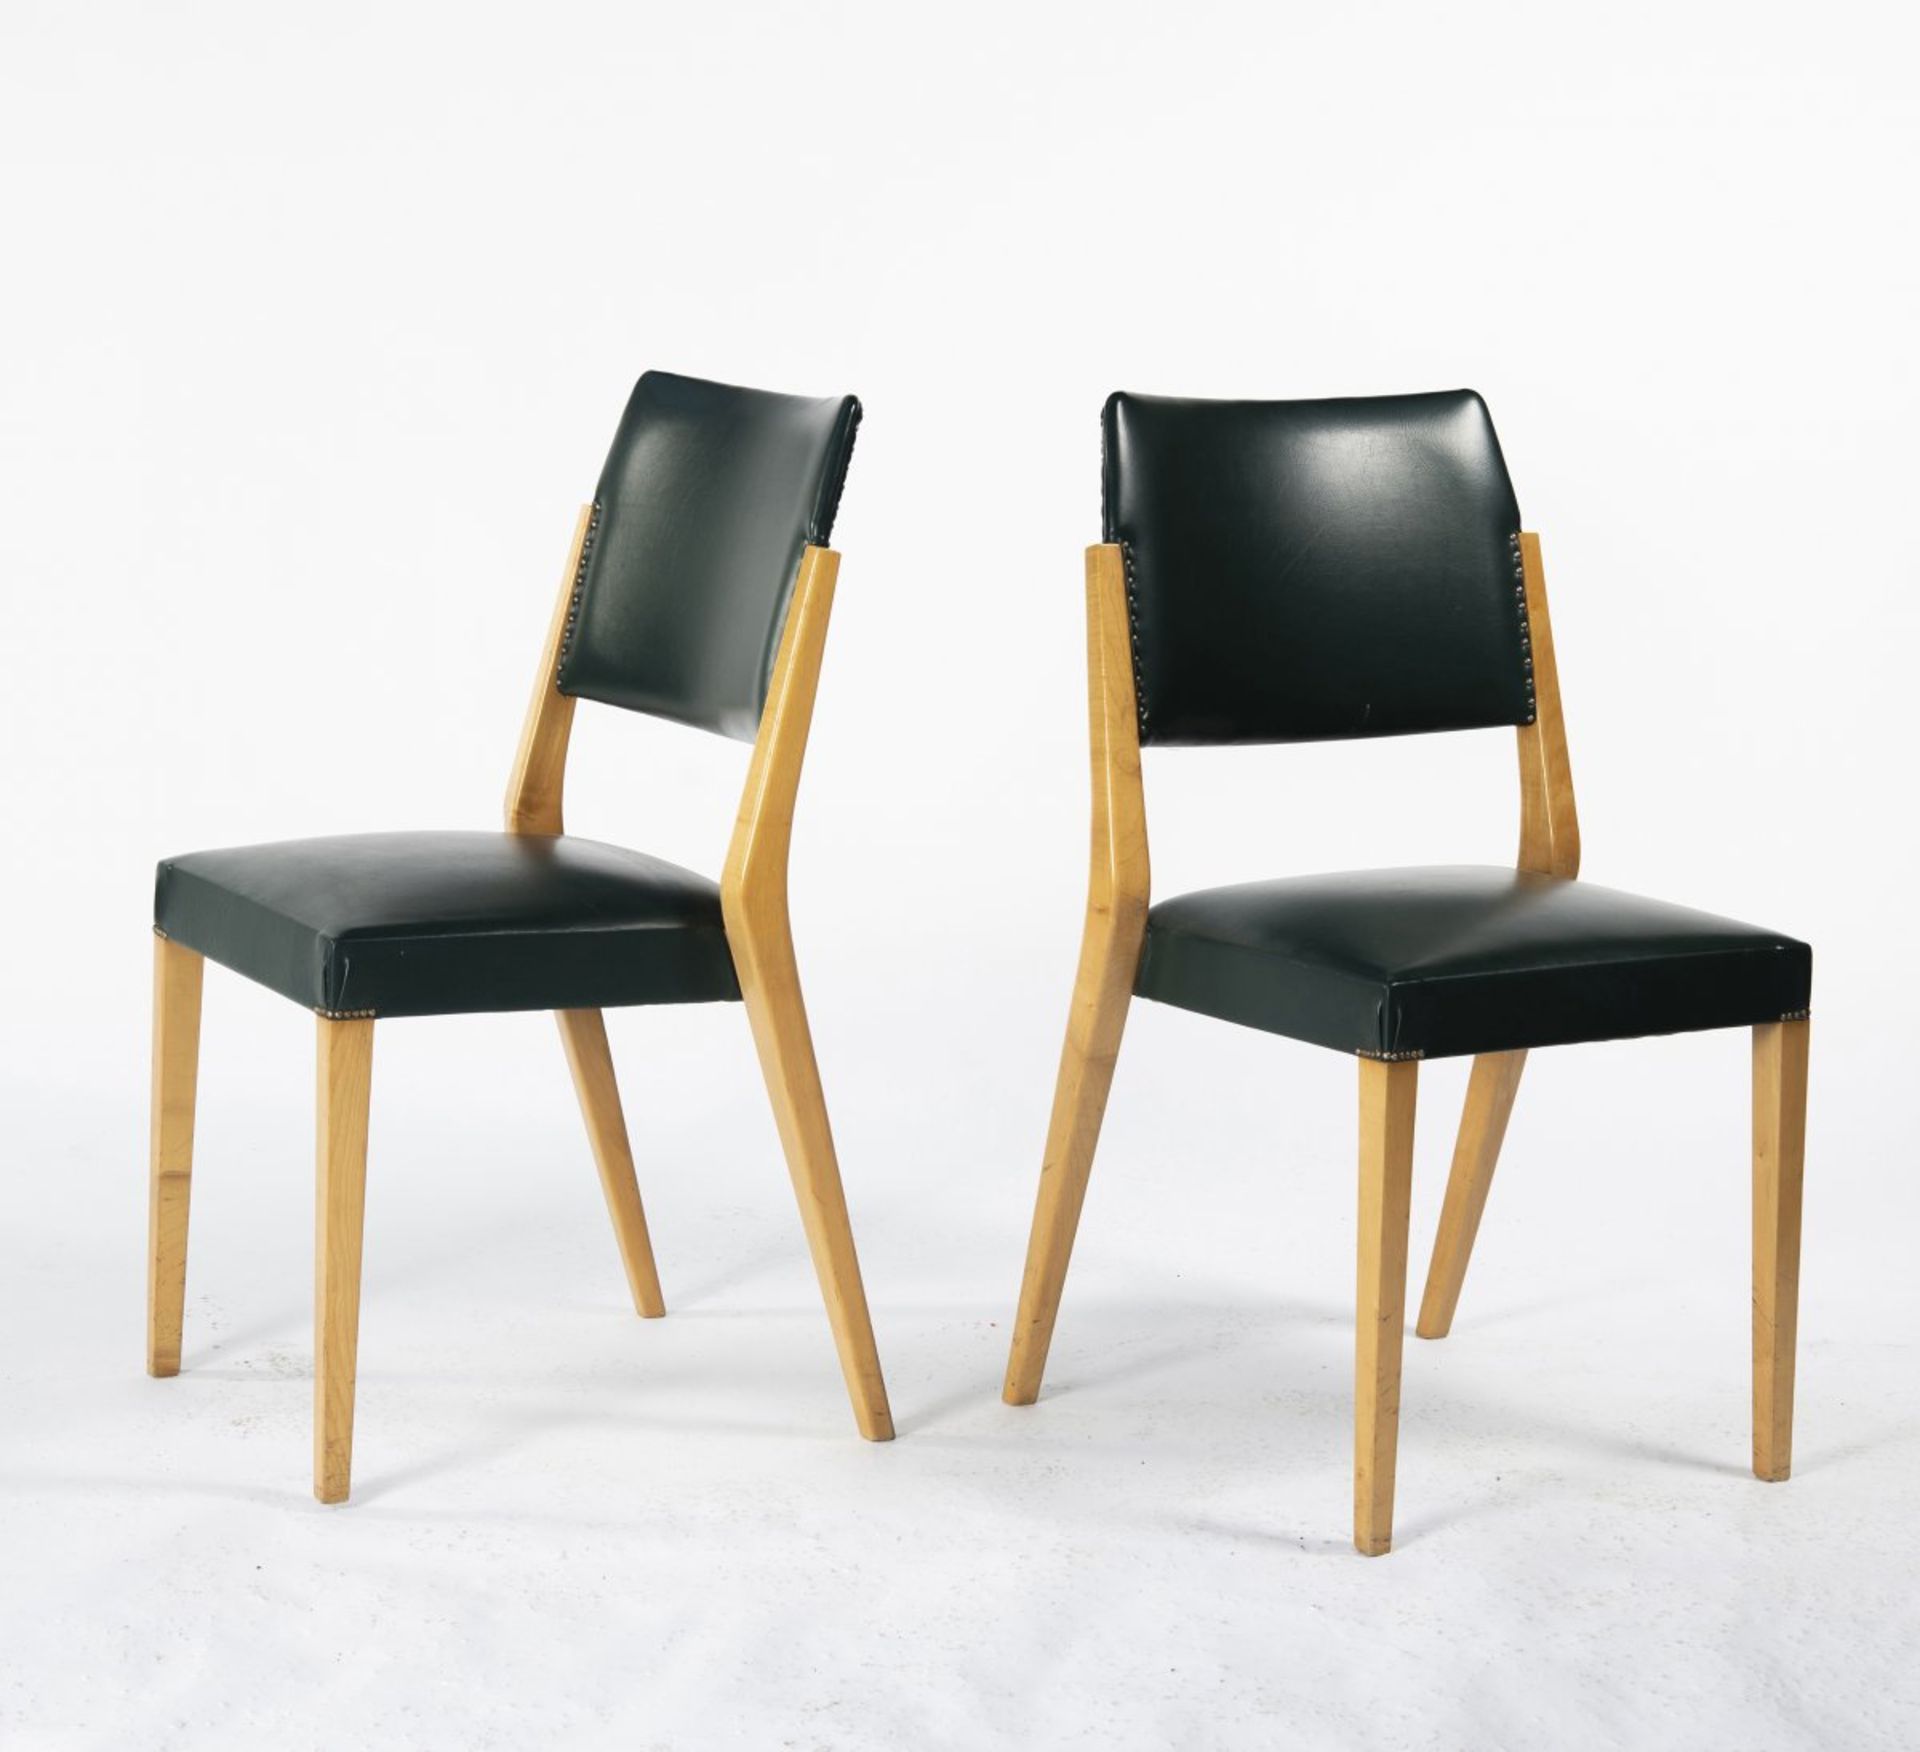 Karl Schwanzer, Set of two stacking chairs 'S-764P', 1953